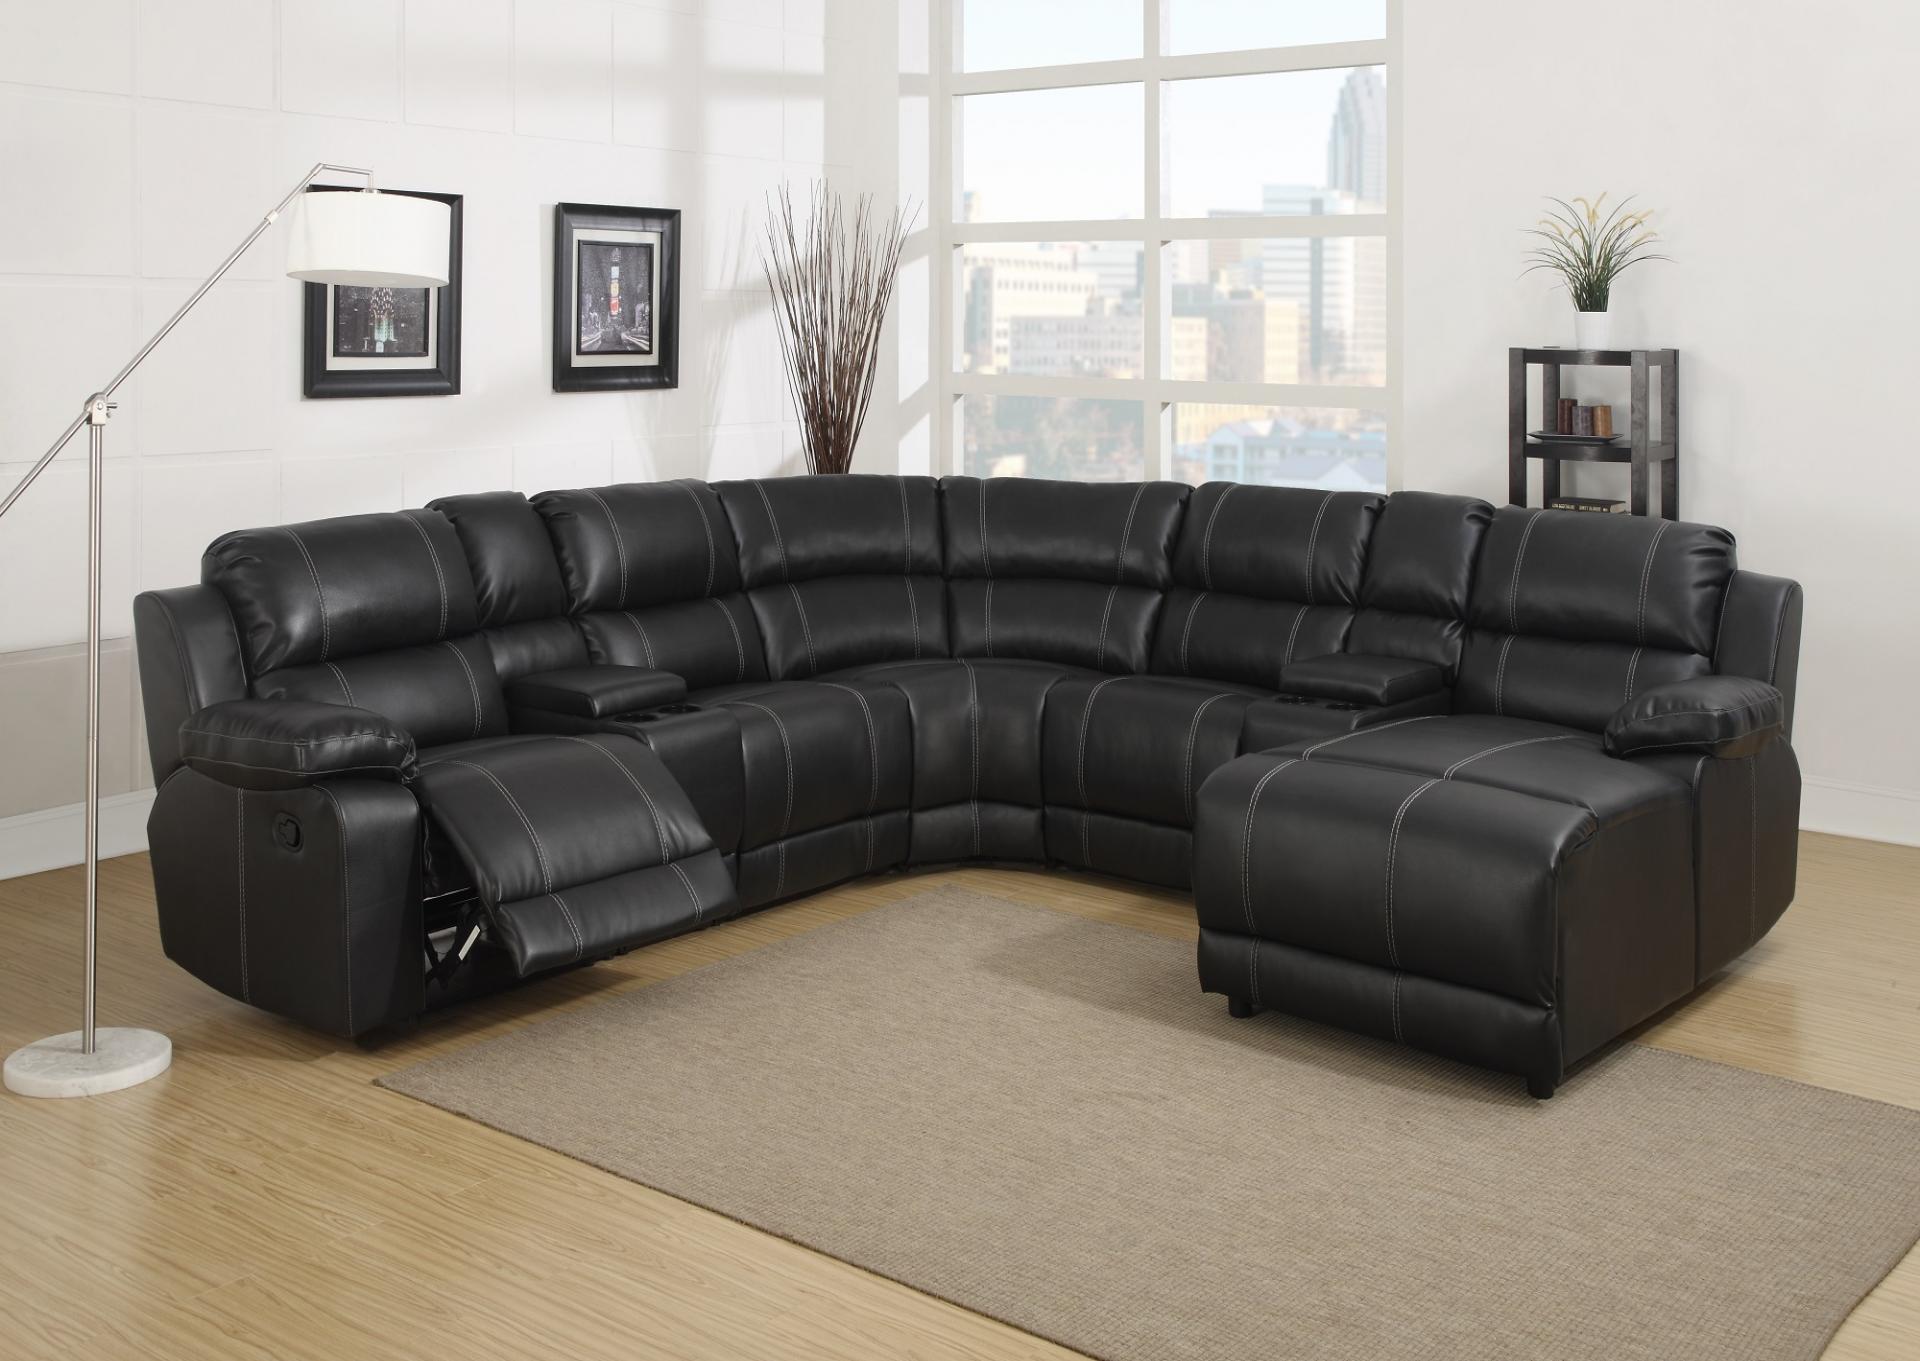 212 6pc Black Leather Sectional ,Lifestyle